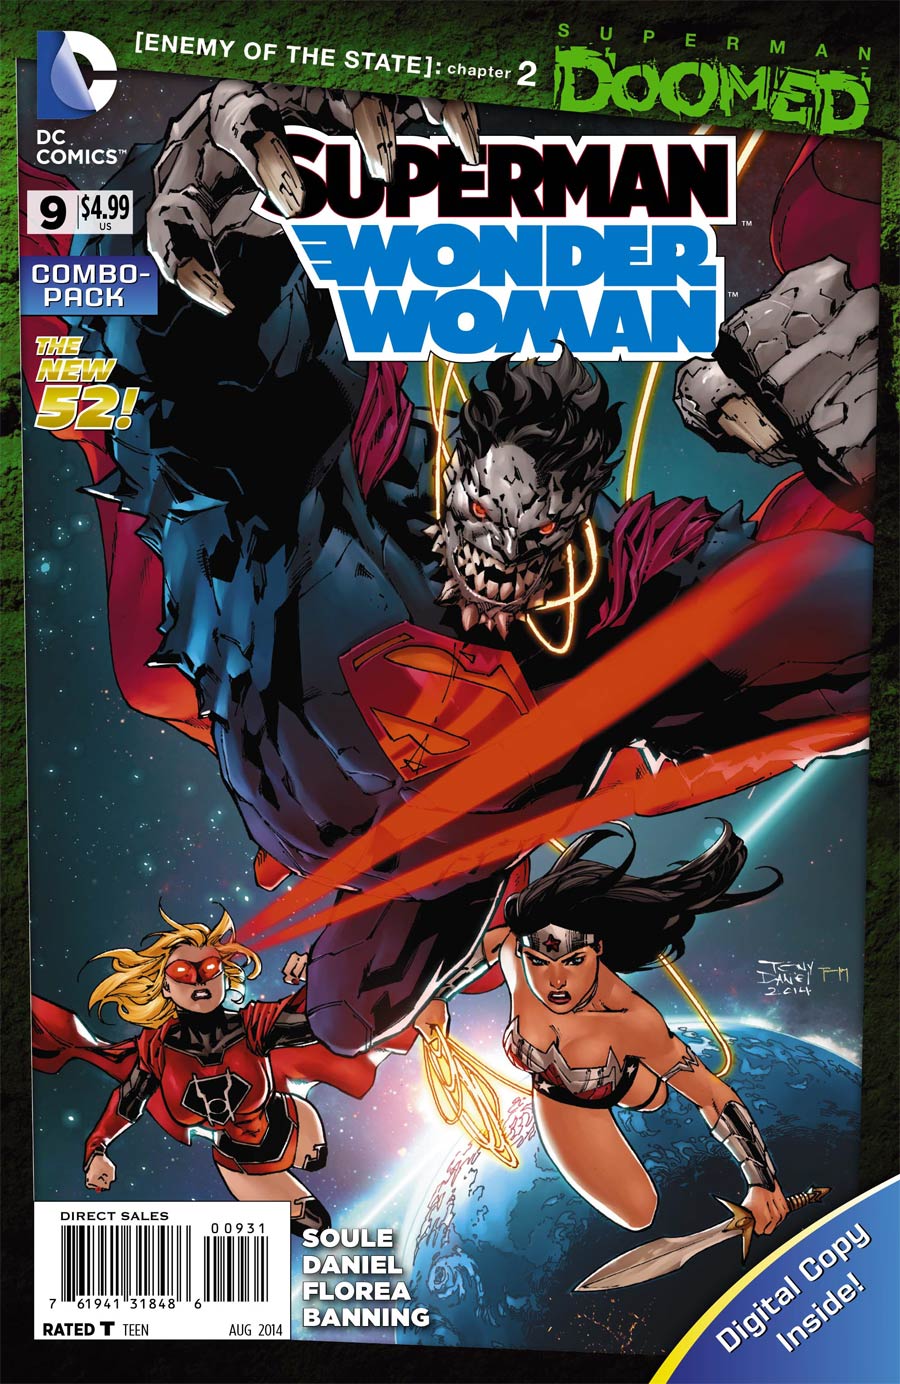 Superman Wonder Woman #9 Cover D Combo Pack Without Polybag (Superman Doomed Tie-In)